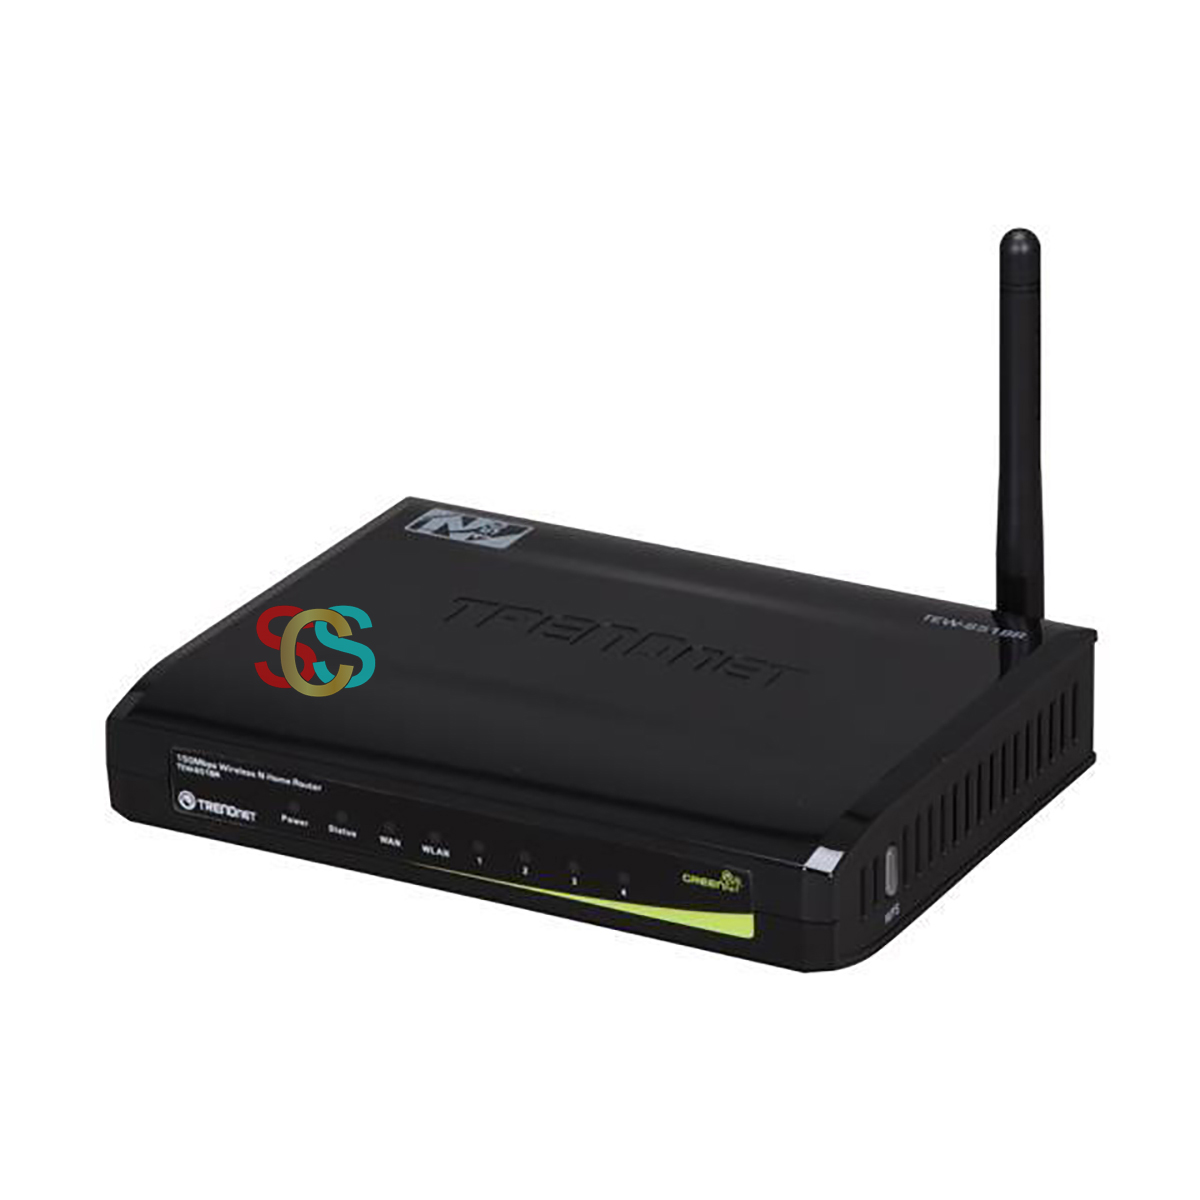 Trendnet TEW-651BR 150 Mbps Ethernet Single-Band Wi-Fi Router